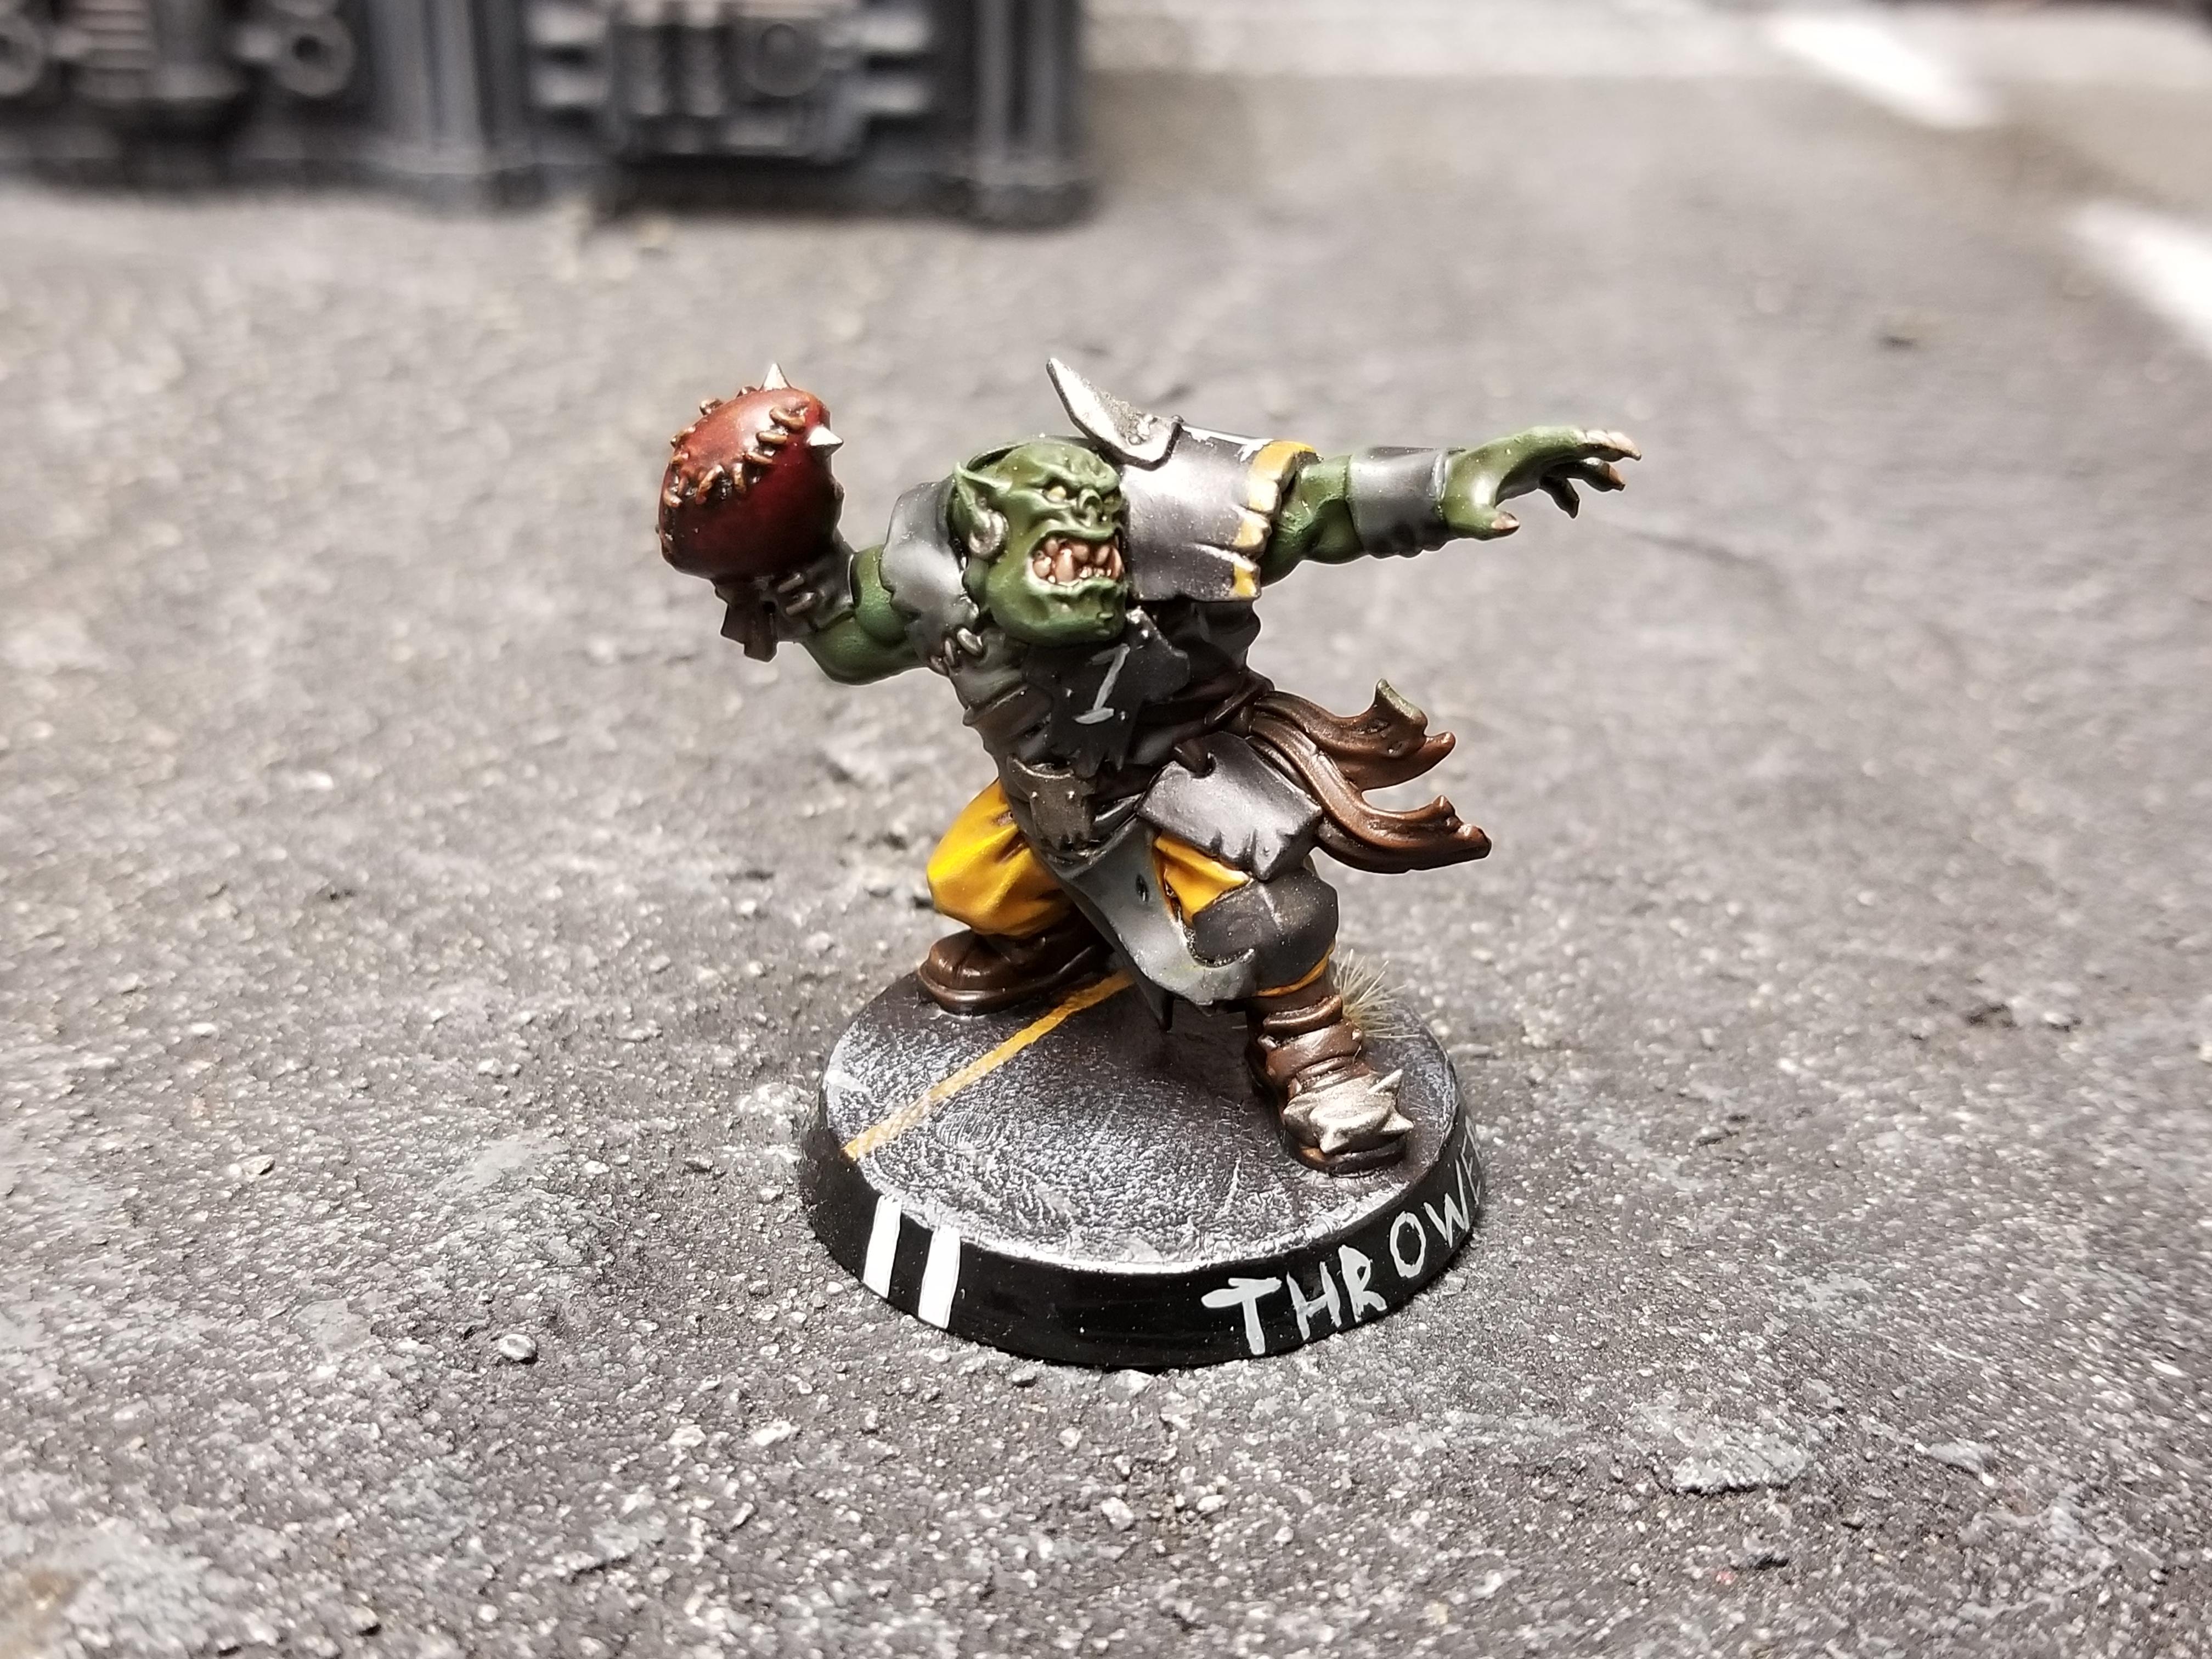 Blood Bowl, Conversion, Go Steelers, Goblins, Gouged Eyes, Kitbash, Orcs, Orks, Pittsburgh, Thrower